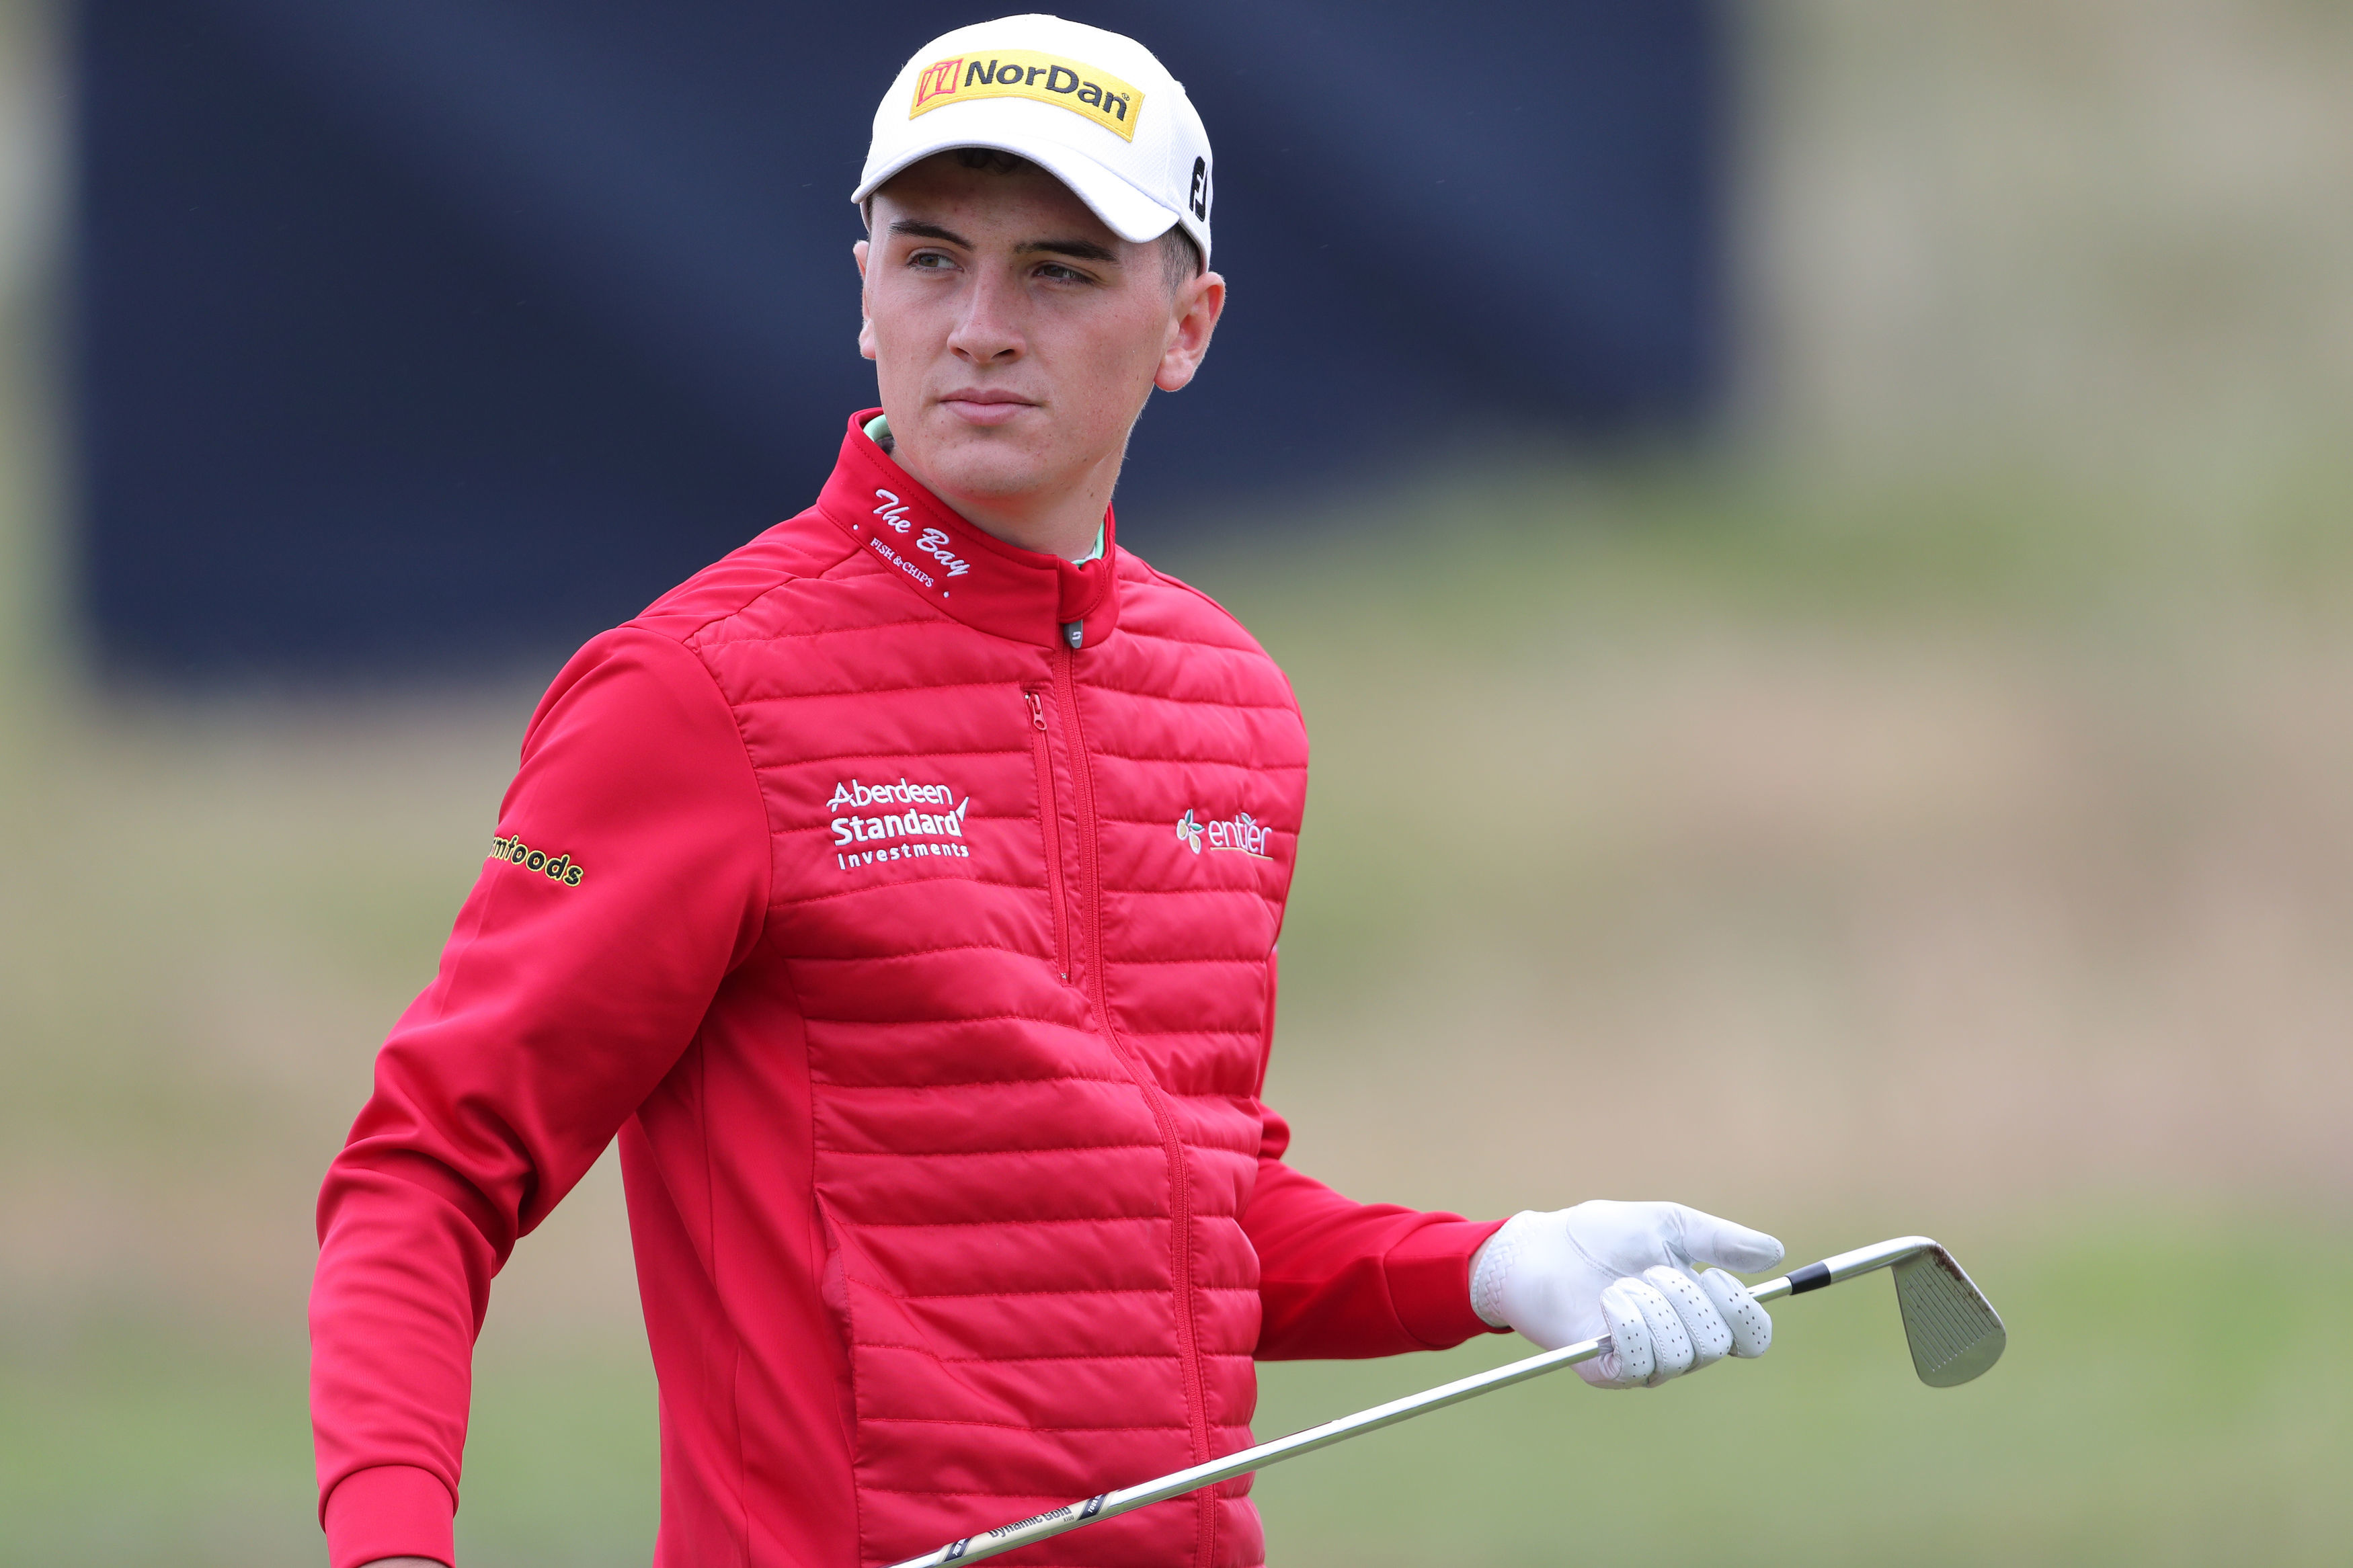 Sam Locke was the early leaders at the Tartan Pro Tour's inaugural event, The Carnoustie Challenge